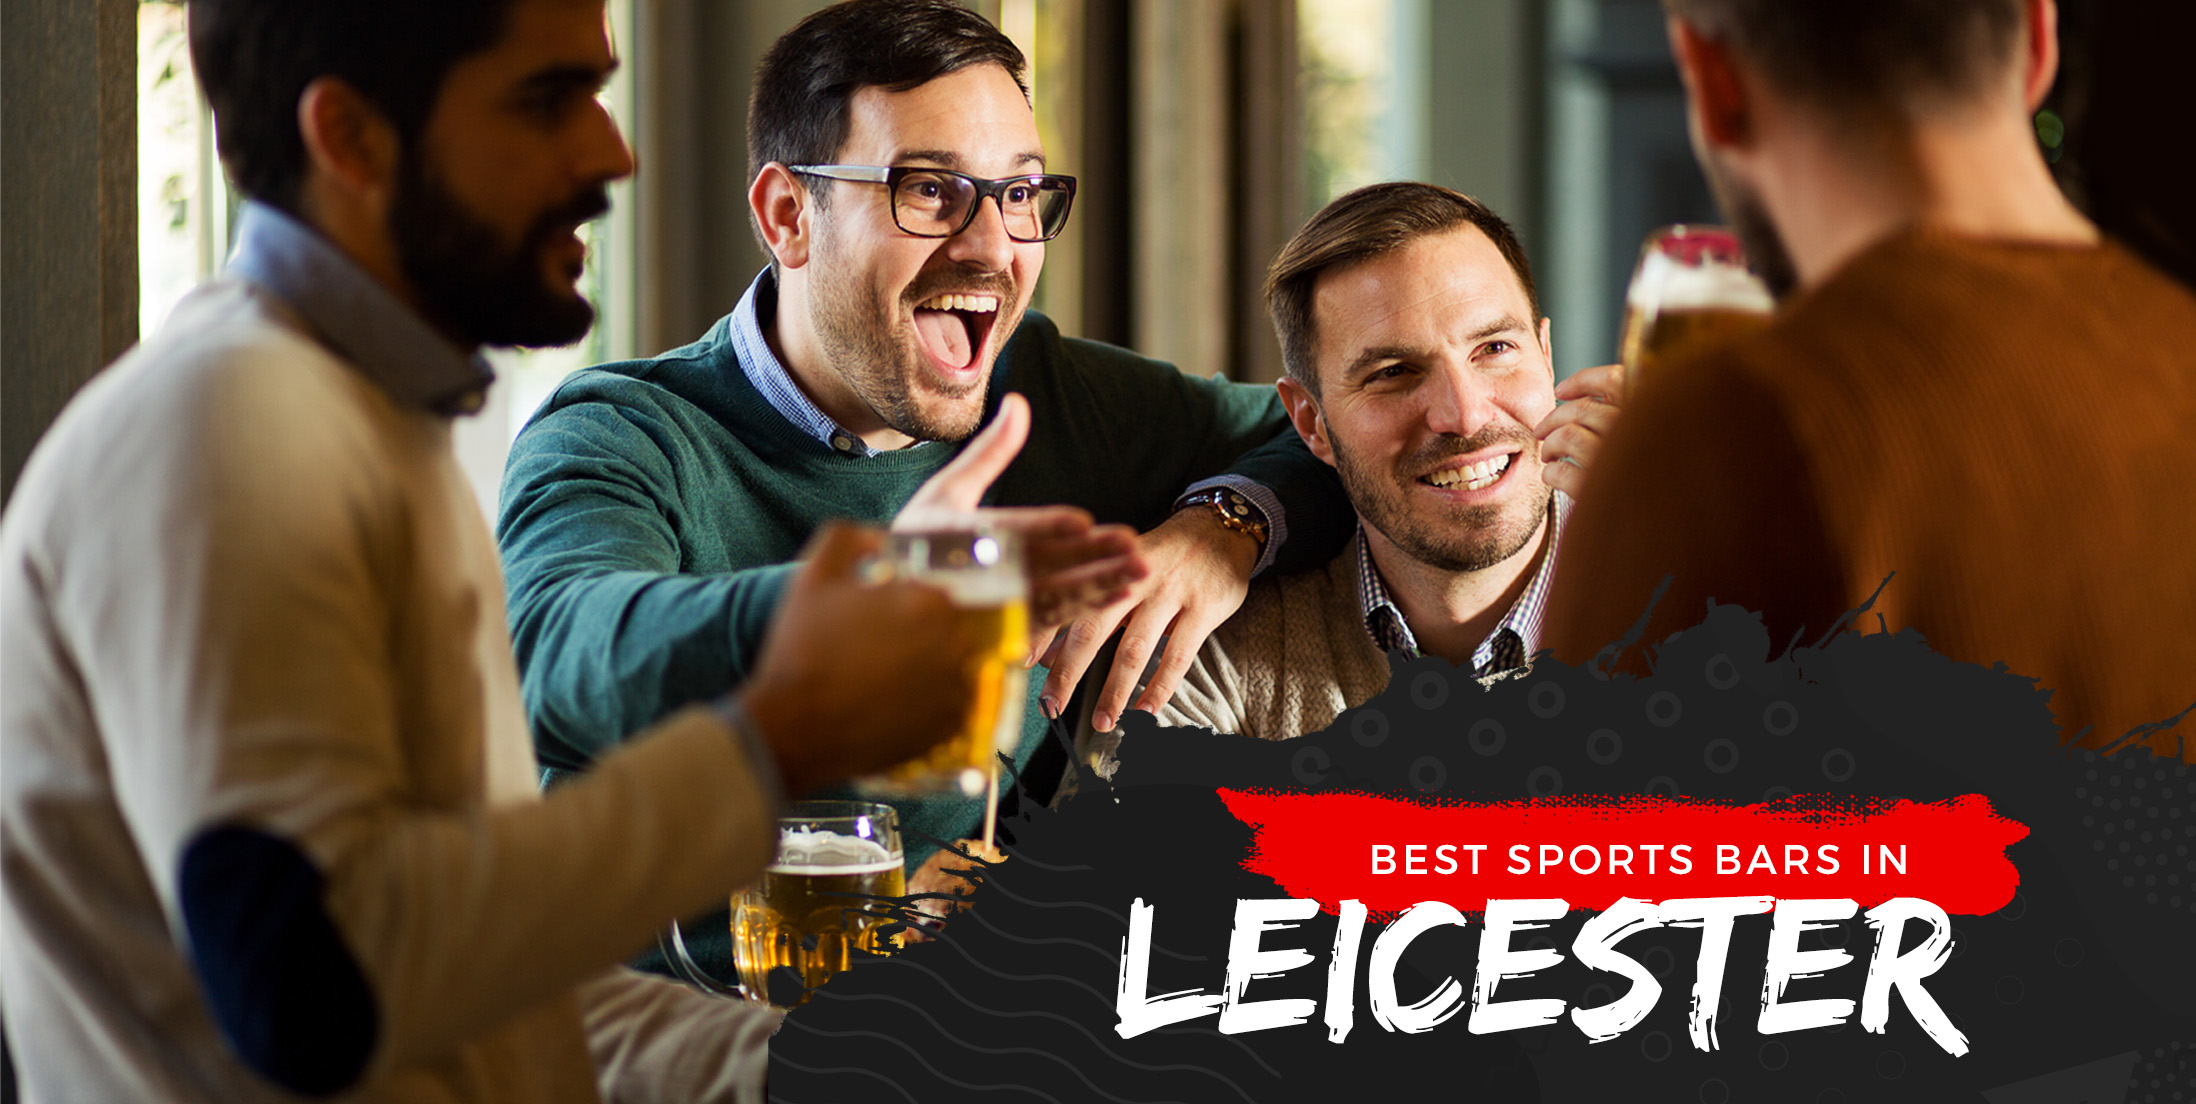 The Best Sports Bars in Leicester